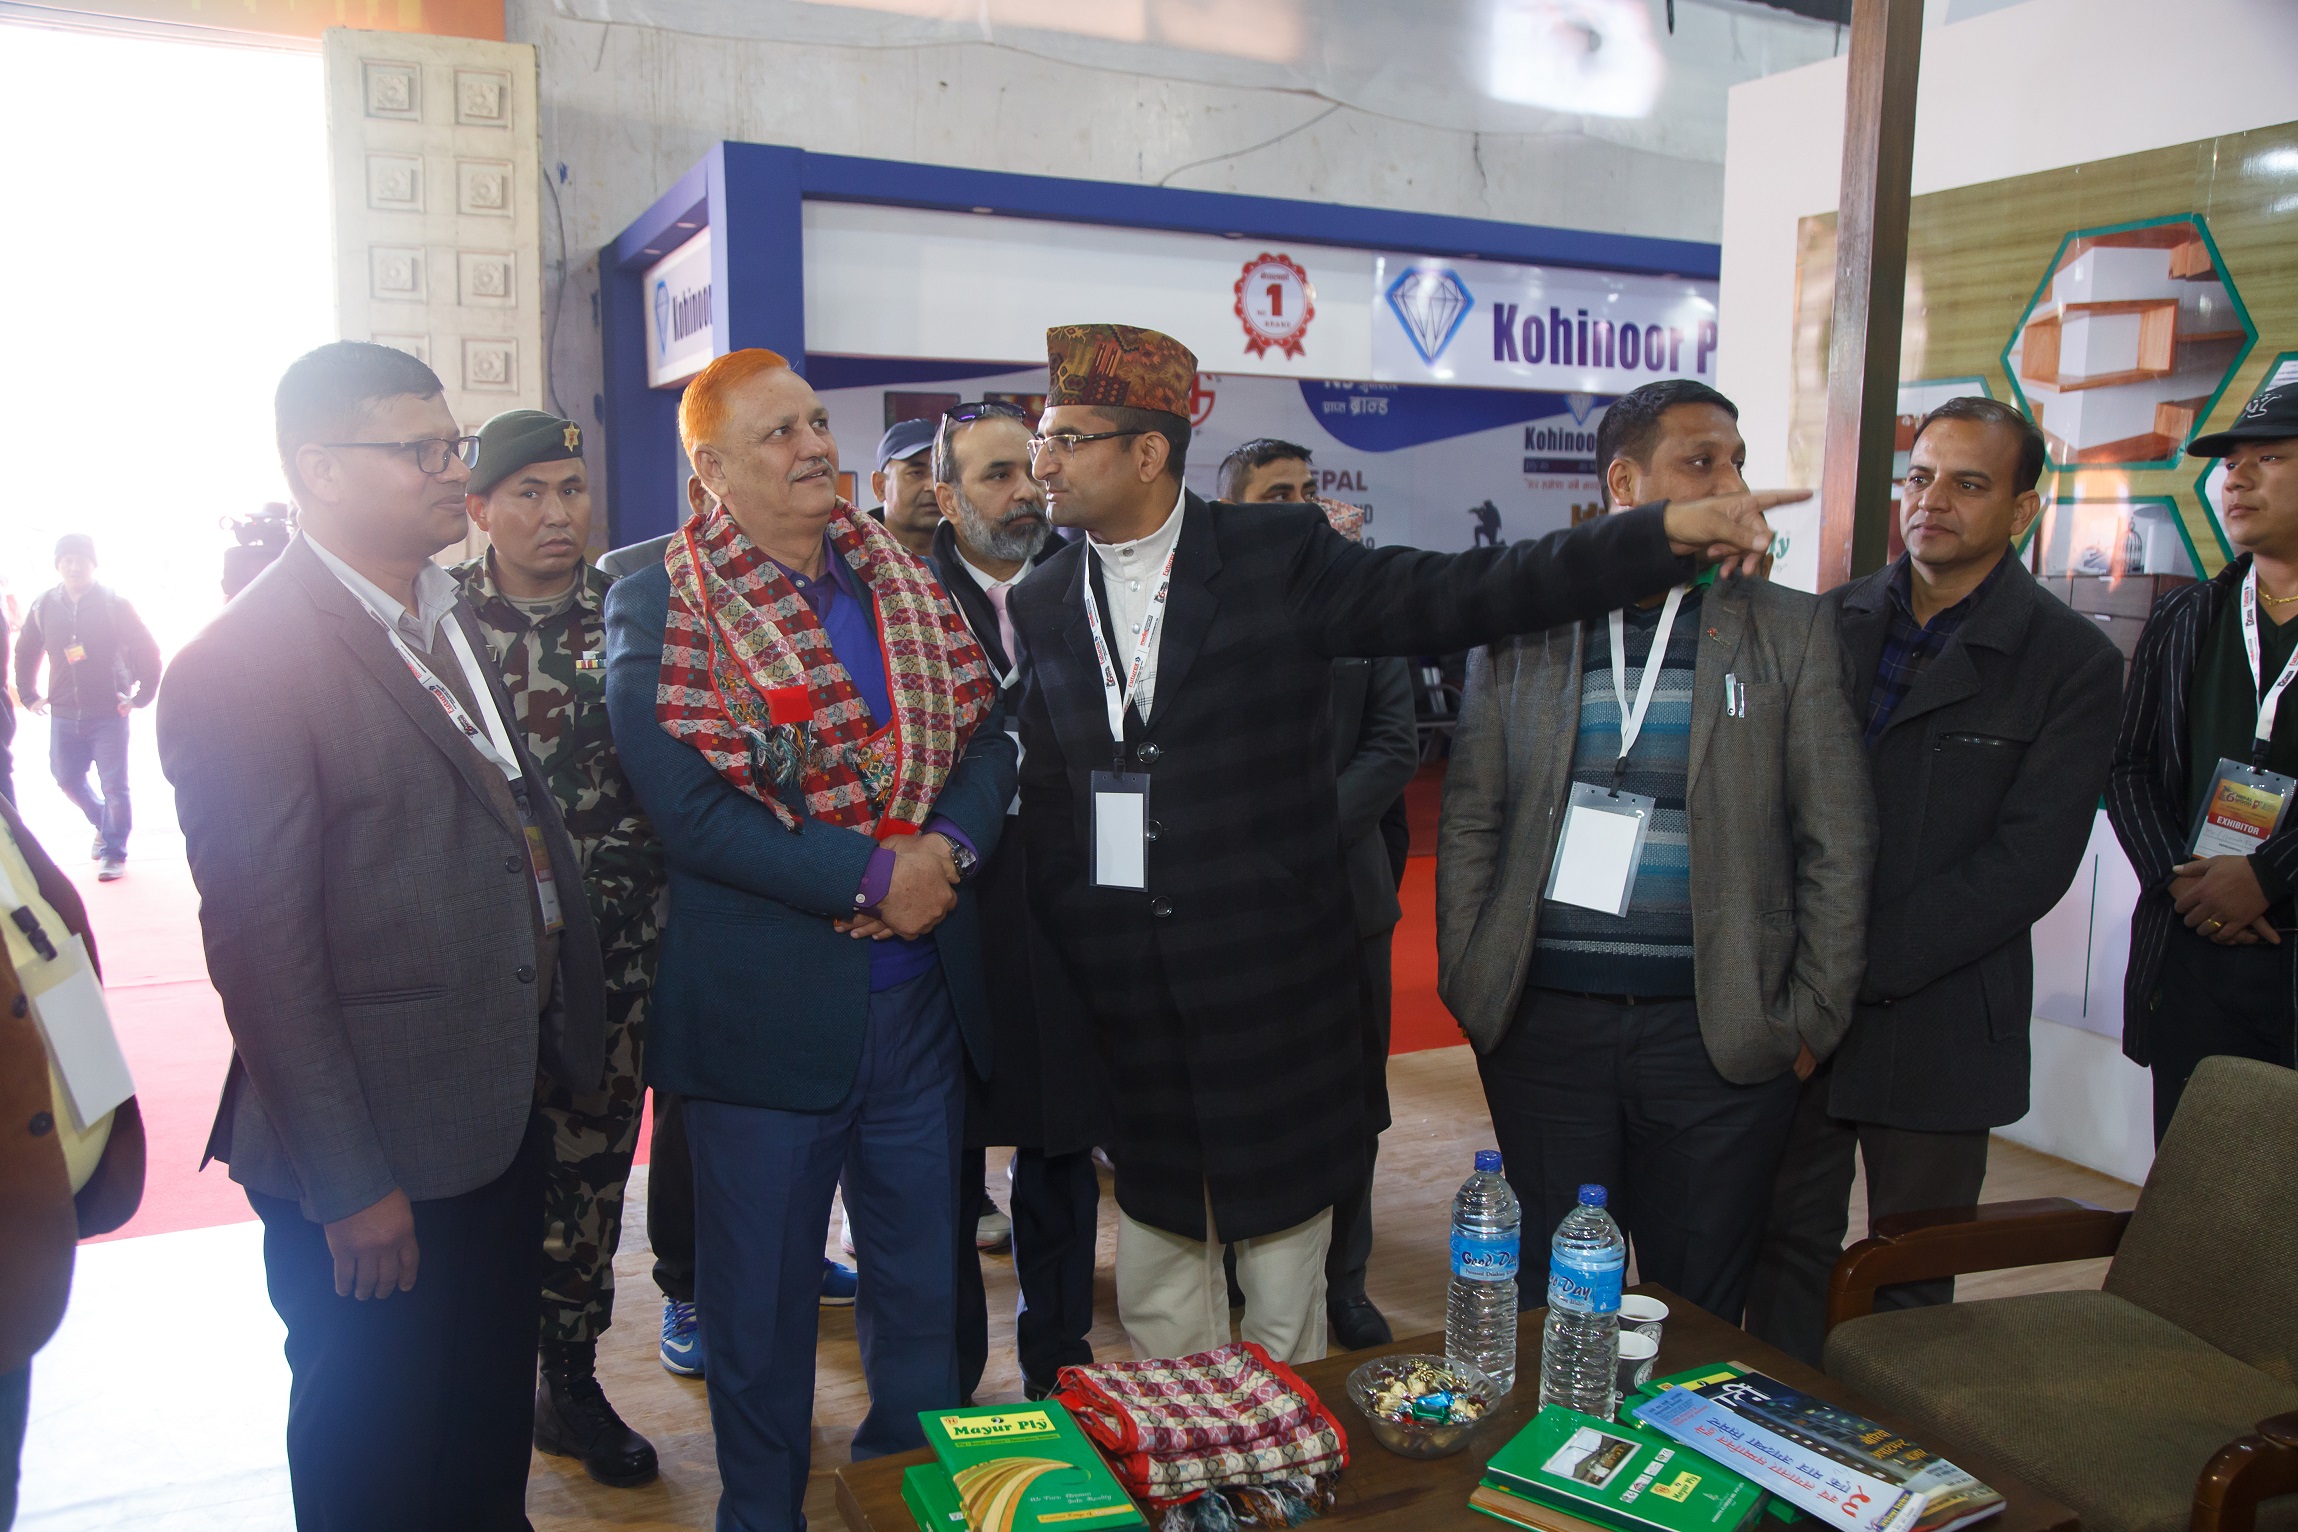 7th Nepal Wood Int’l Expo 2022 and Nepal International Furniture & Home Décor Expo 2022 to be held on Jan 7-9